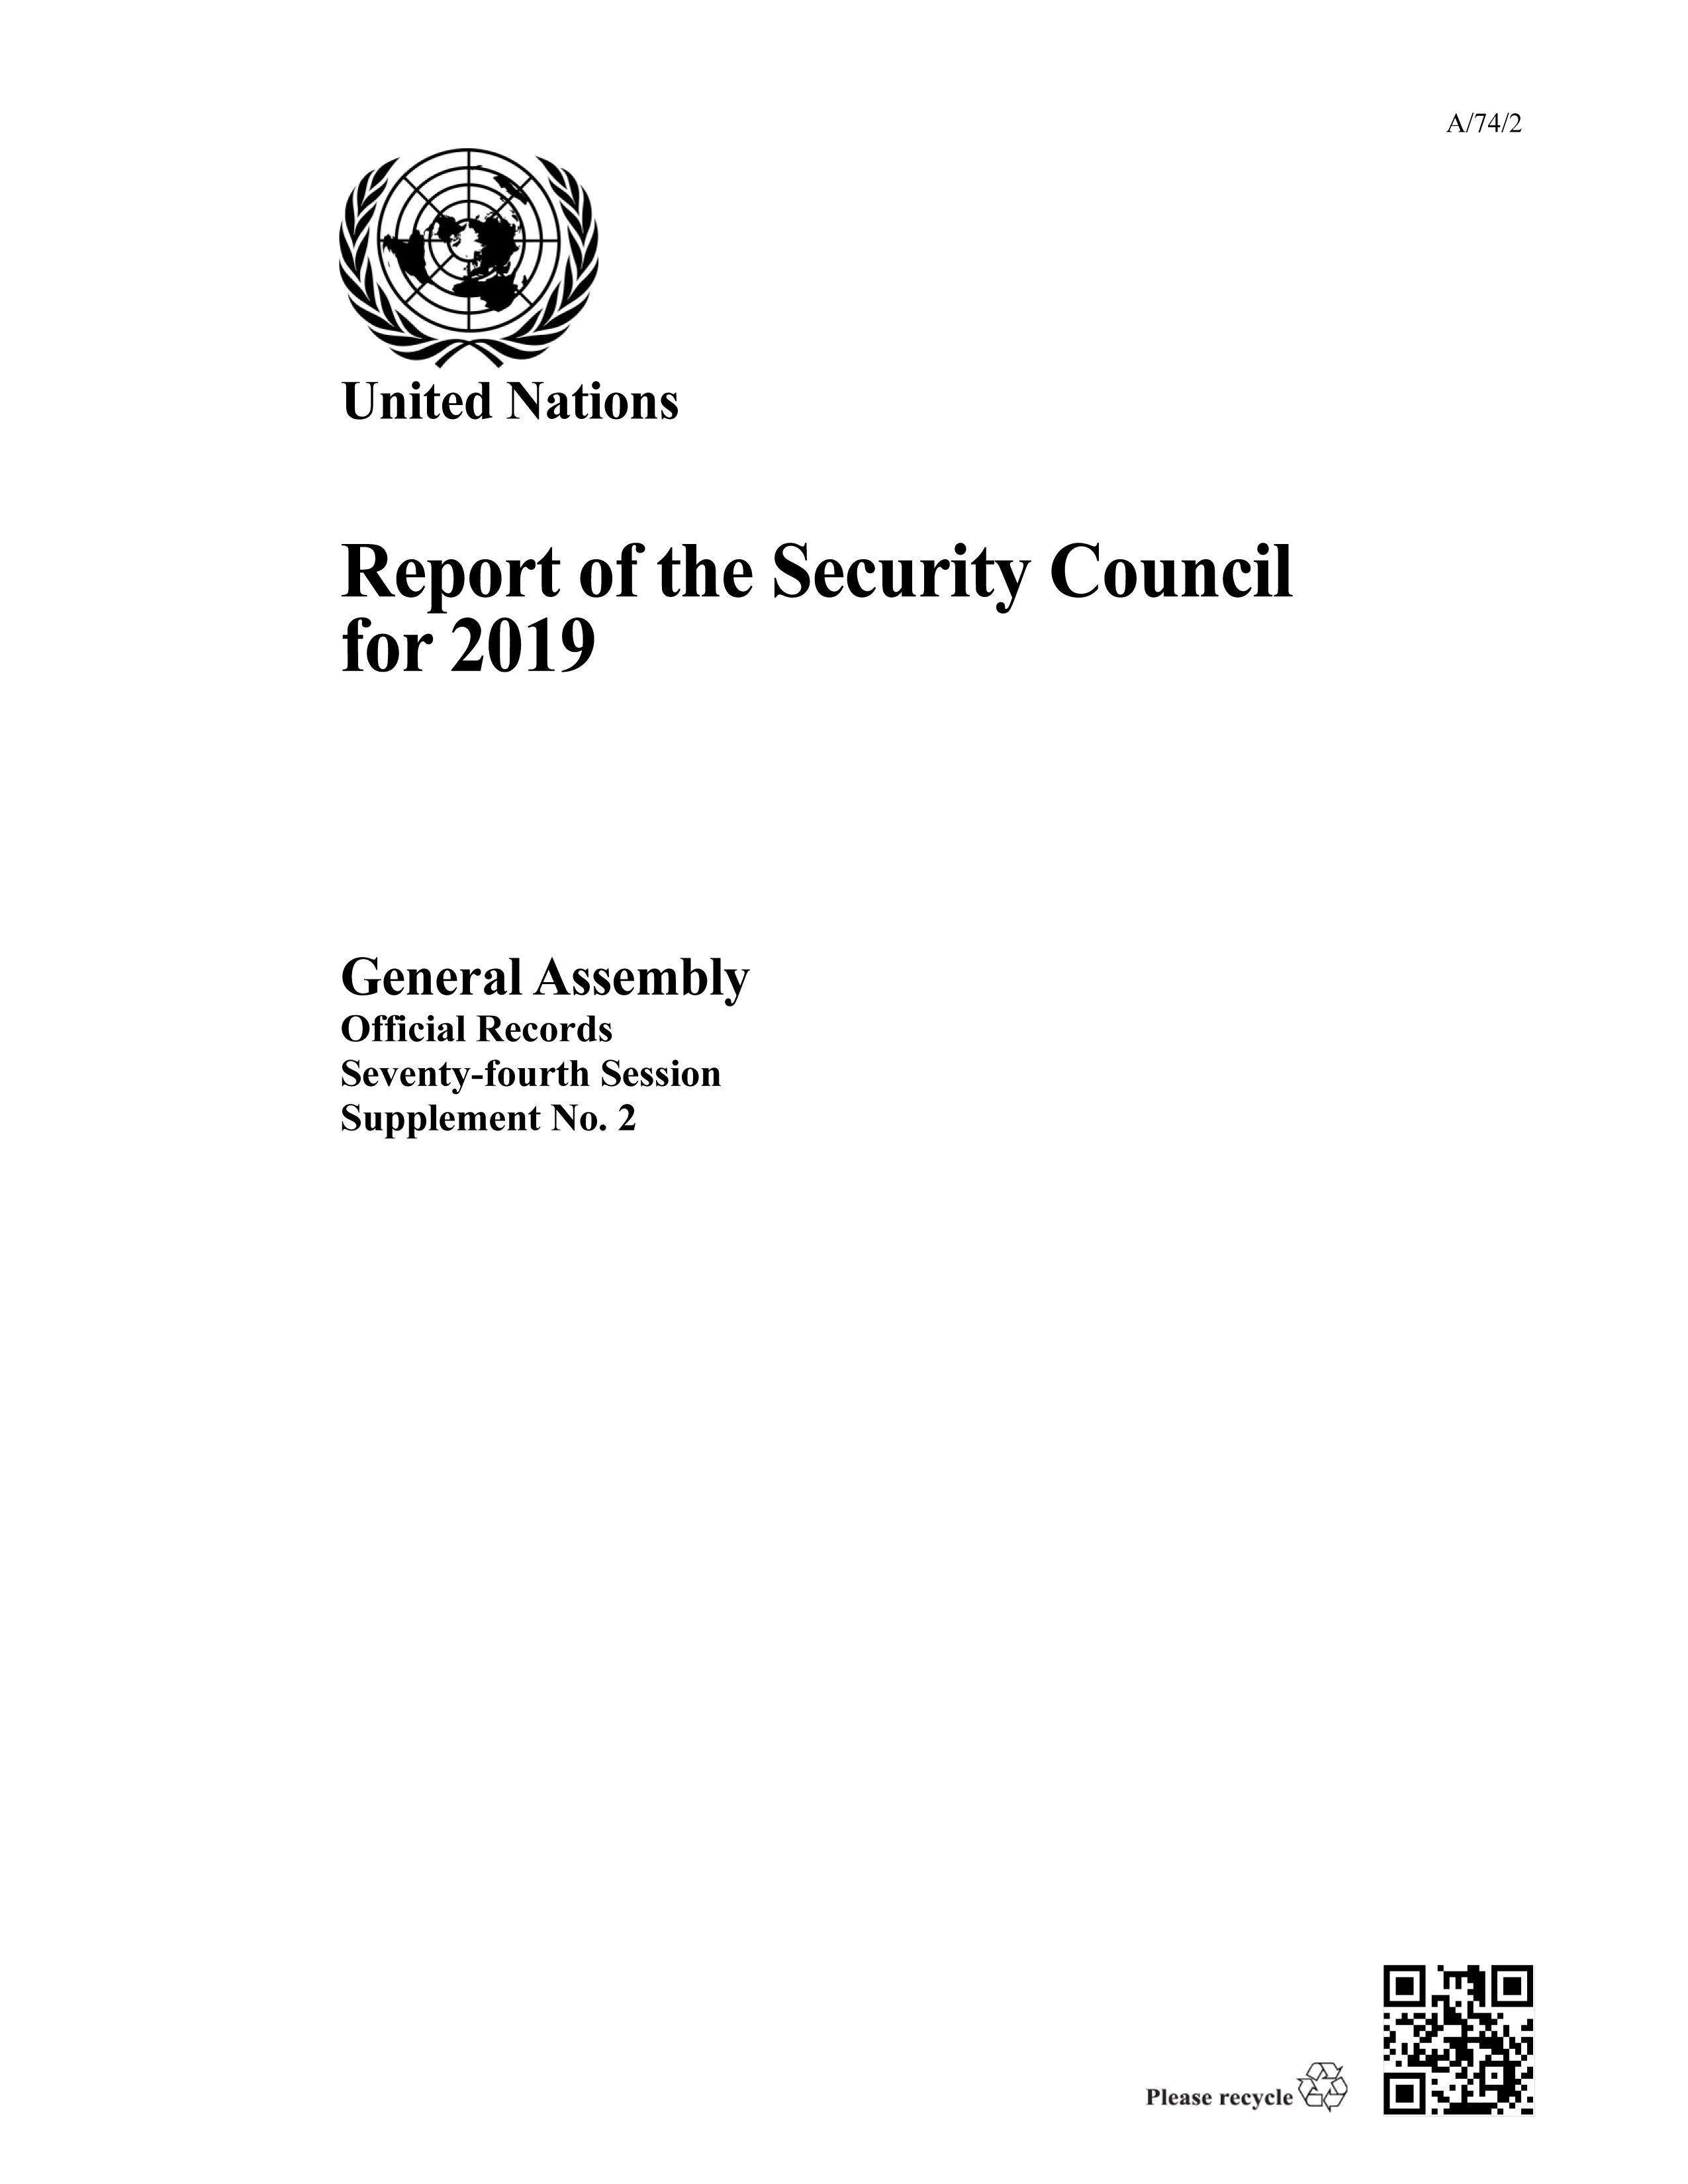 image of Presidents of the Security Council